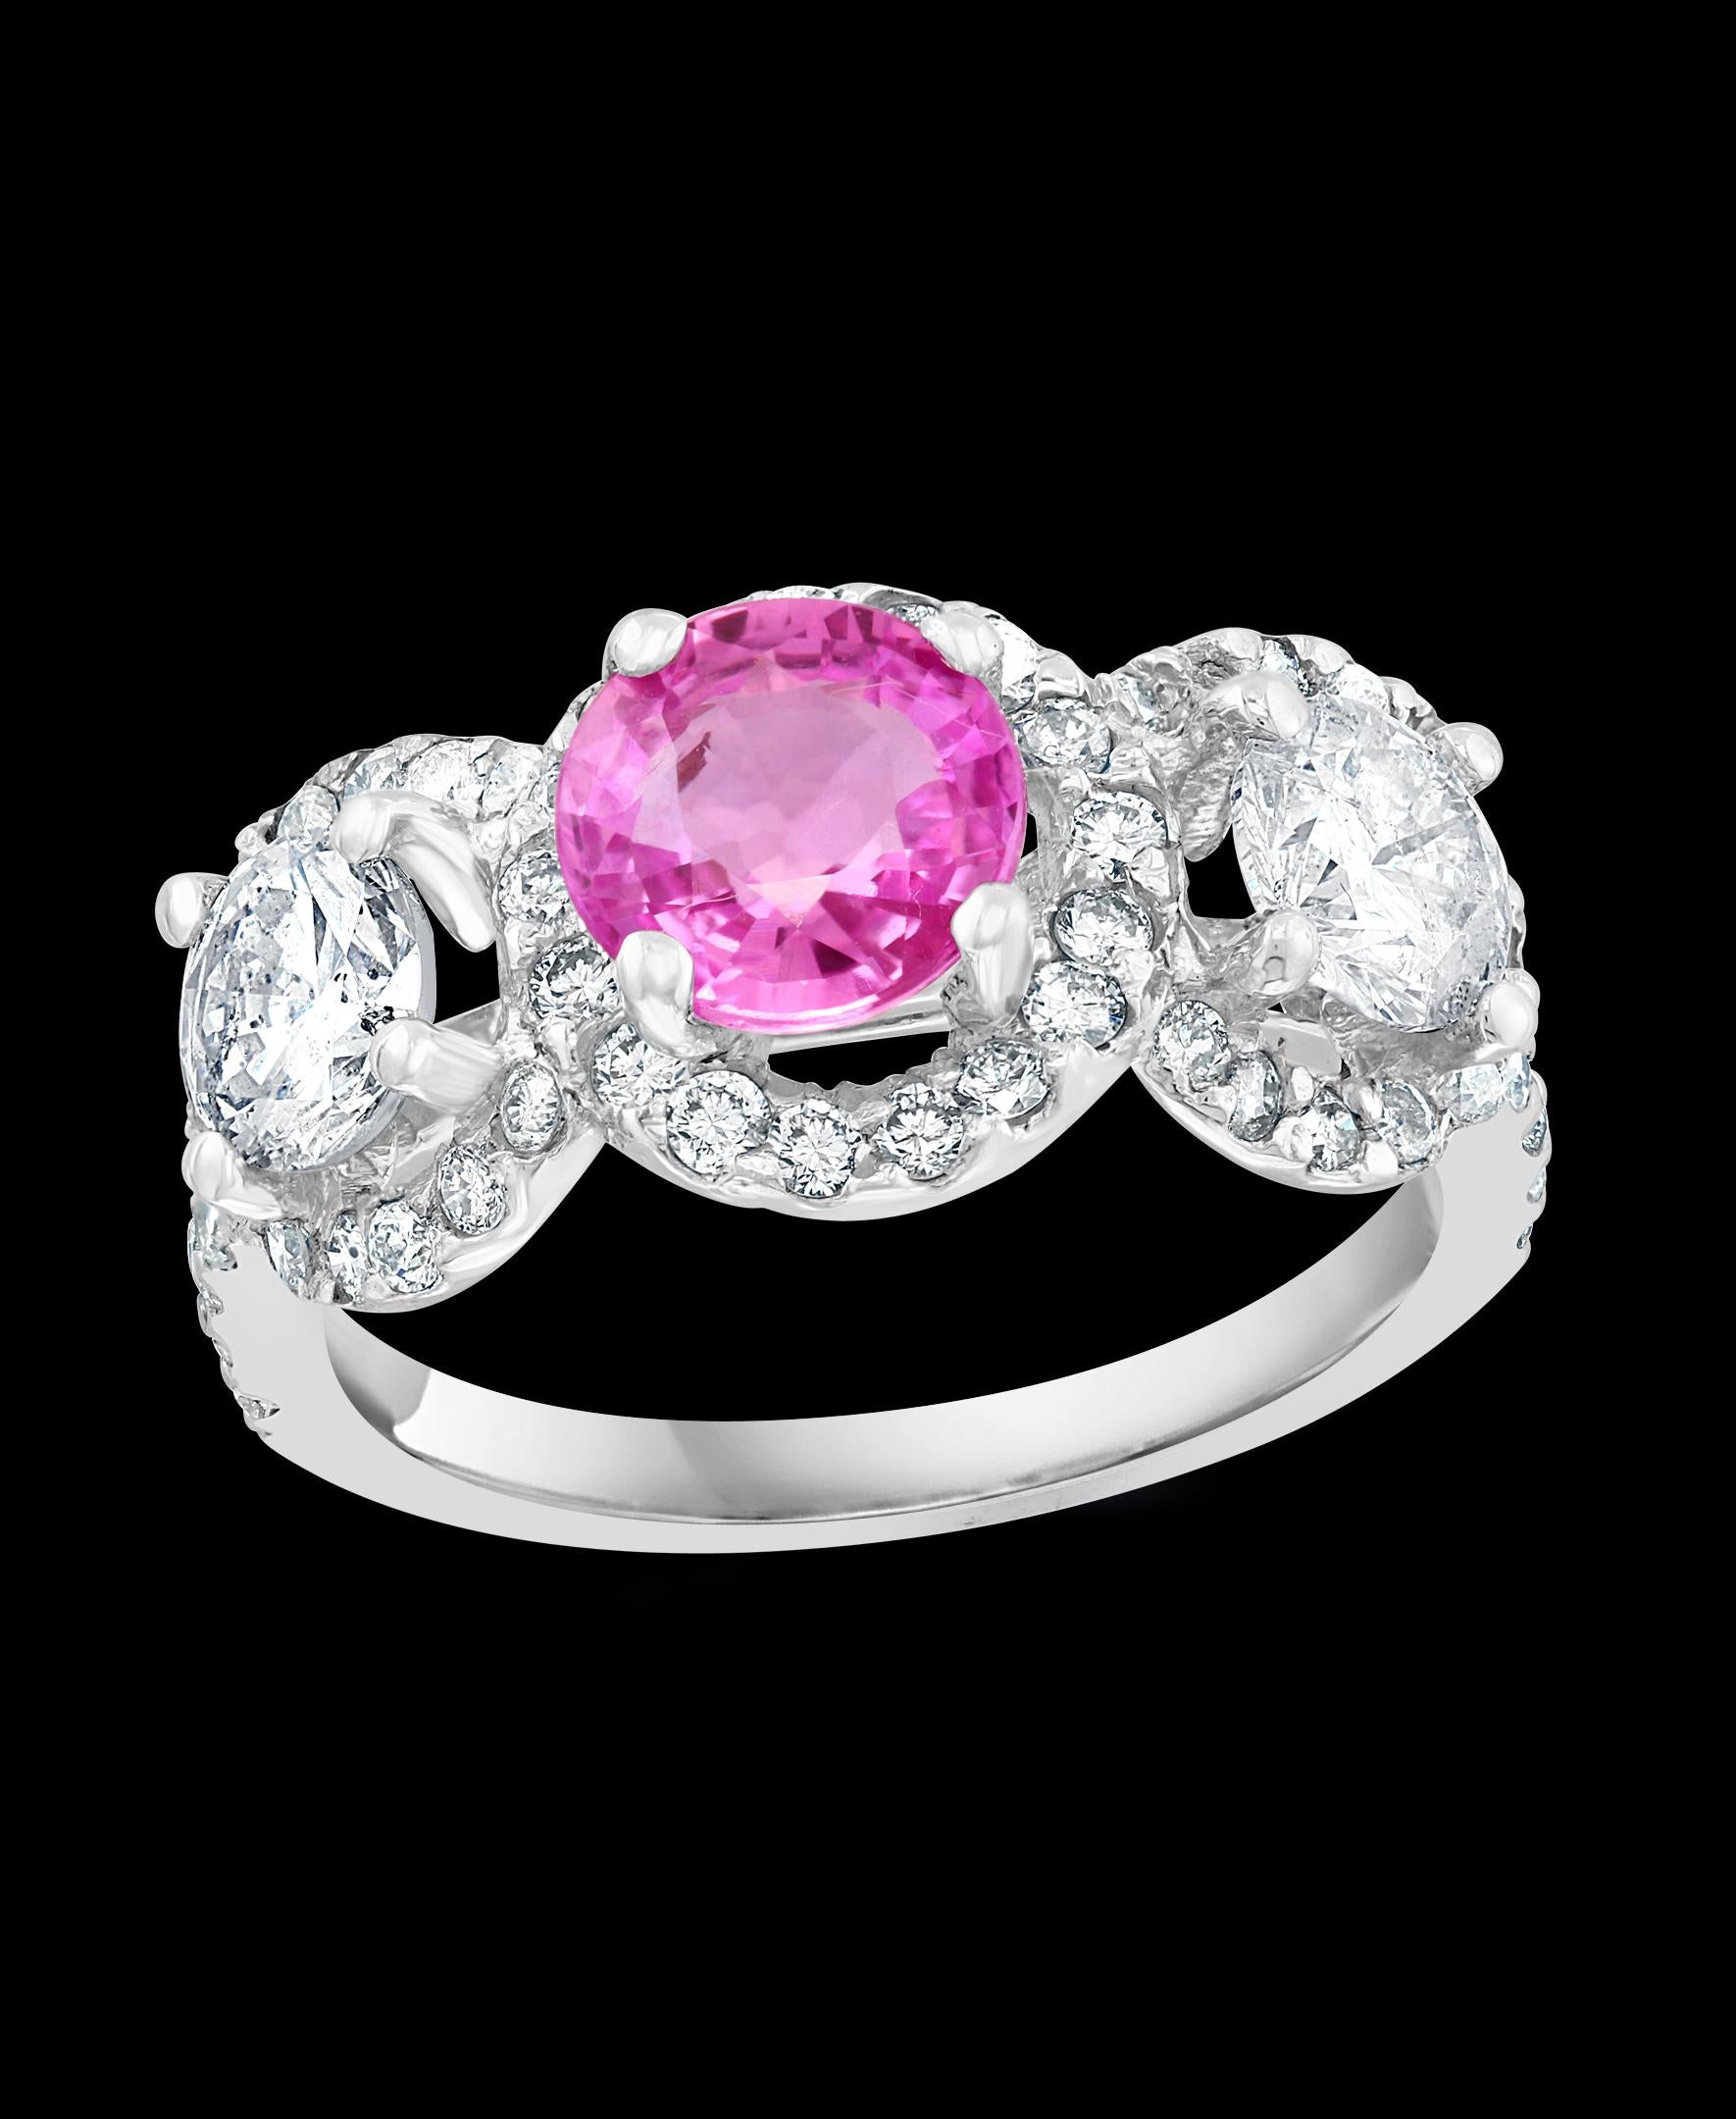 A classic, Ring 
weight of 1 Ct natural Pink sapphire and 1.5 ct  Round  Diamond 18 Karat  White gold   Ring
 All round brilliant cut diamonds, Total diamonds 1.5 ct while there are two solitaire diamonds , Each solitaire diamond is 0.45ct
Natural